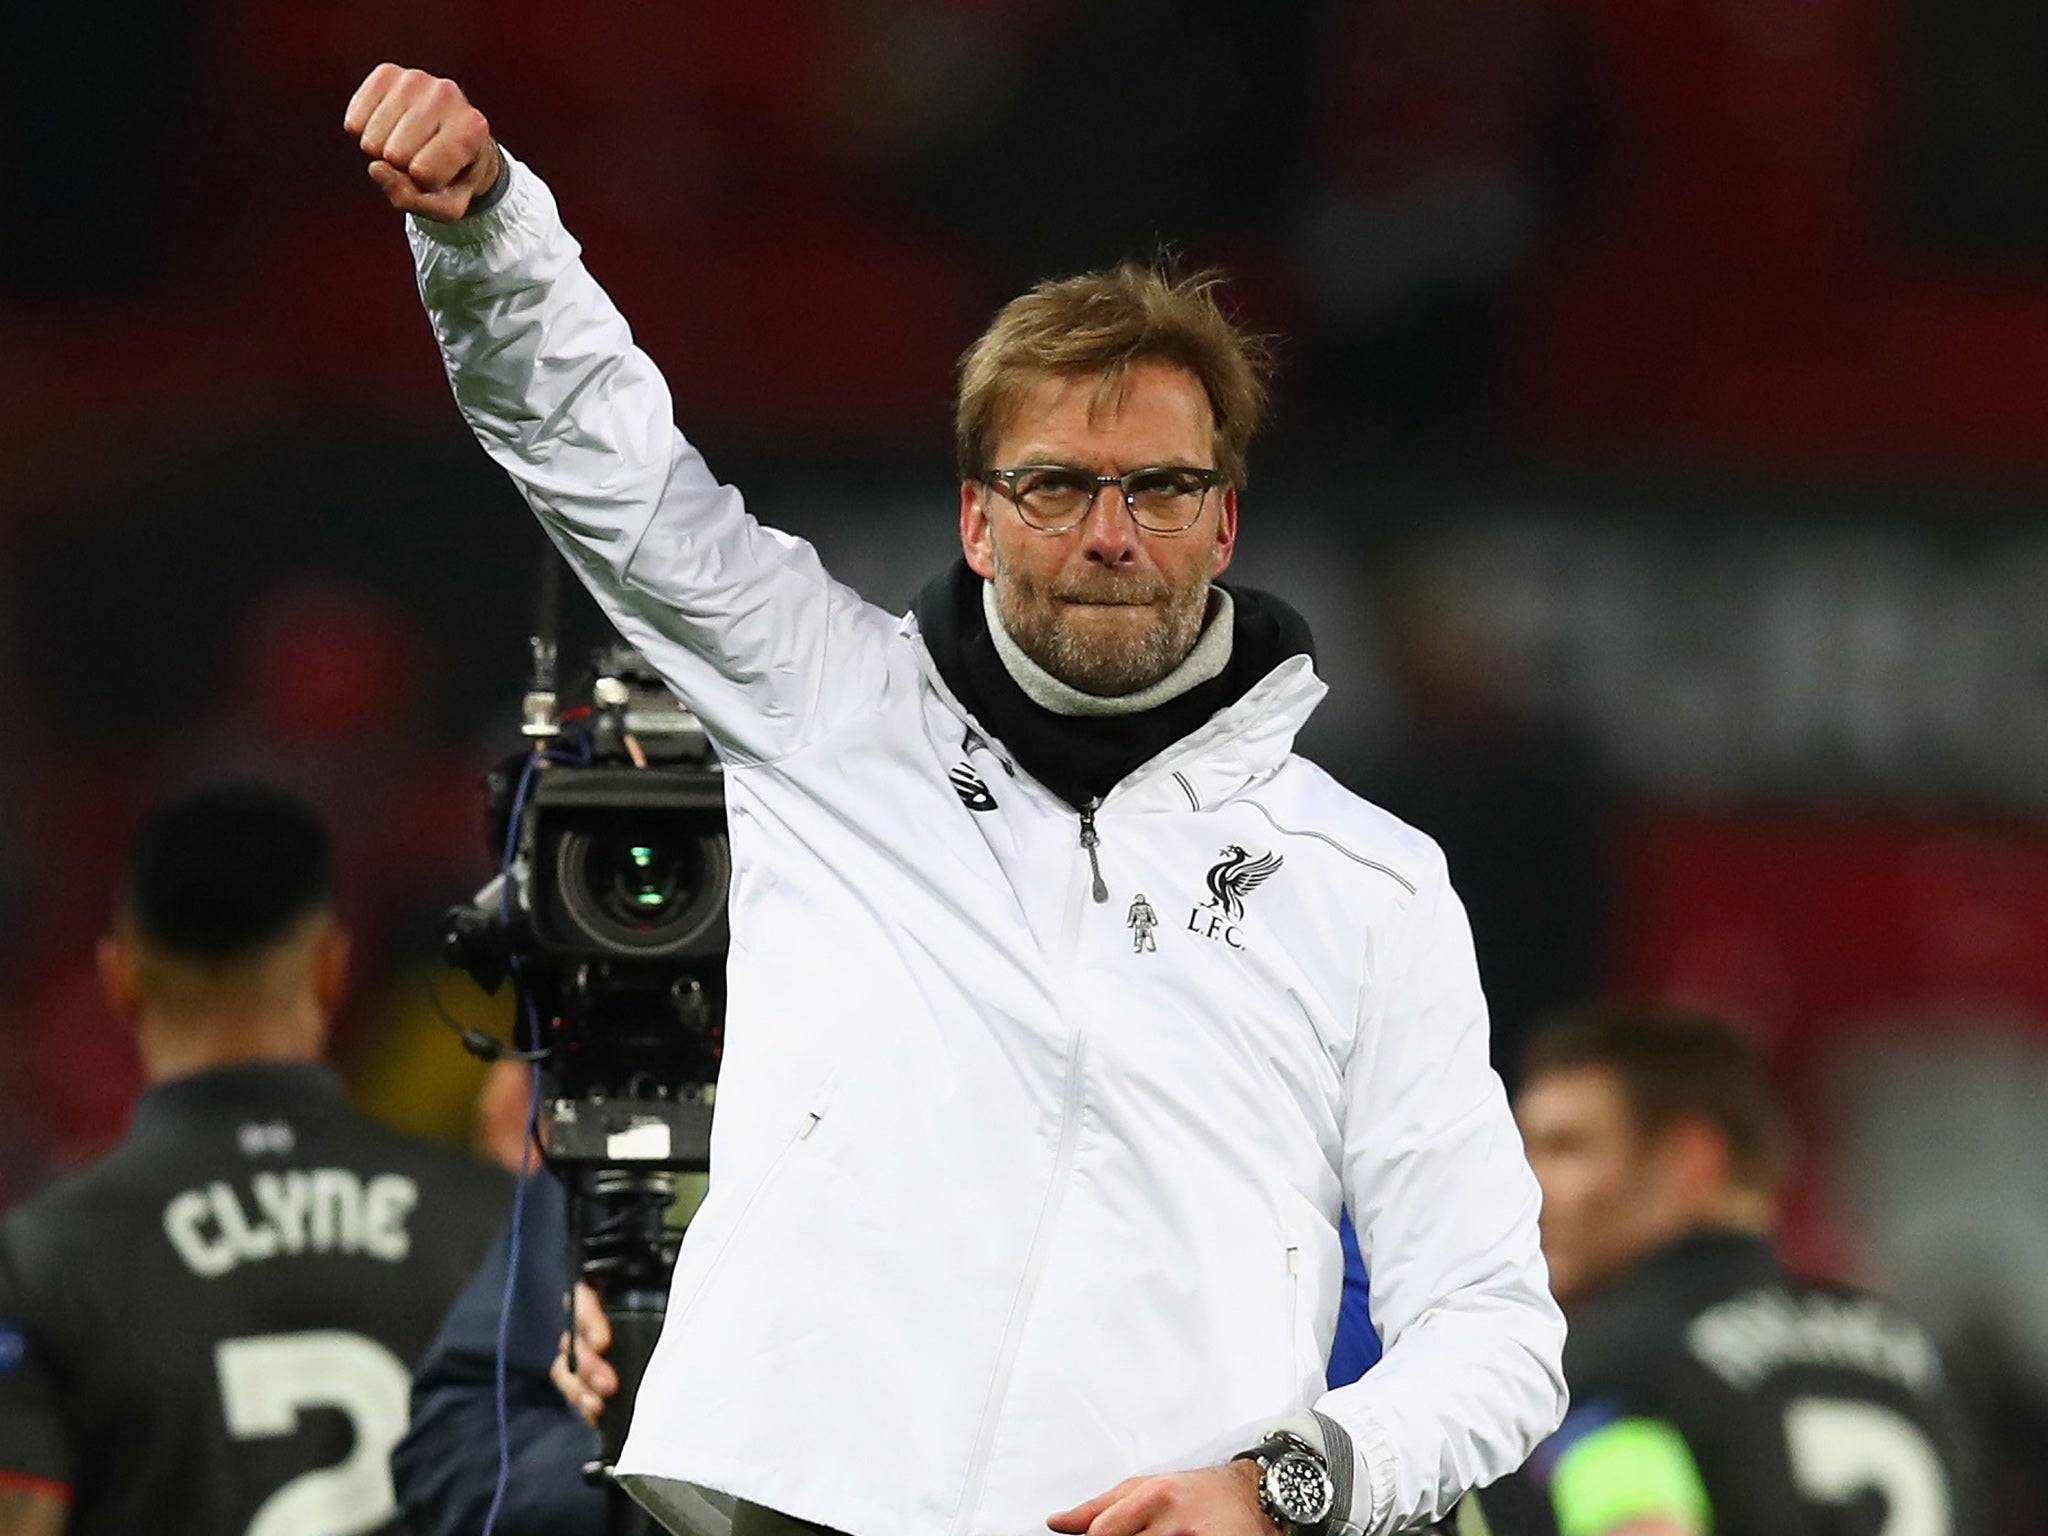 Klopp salutes Liverpool supporters following victory at Manchester United